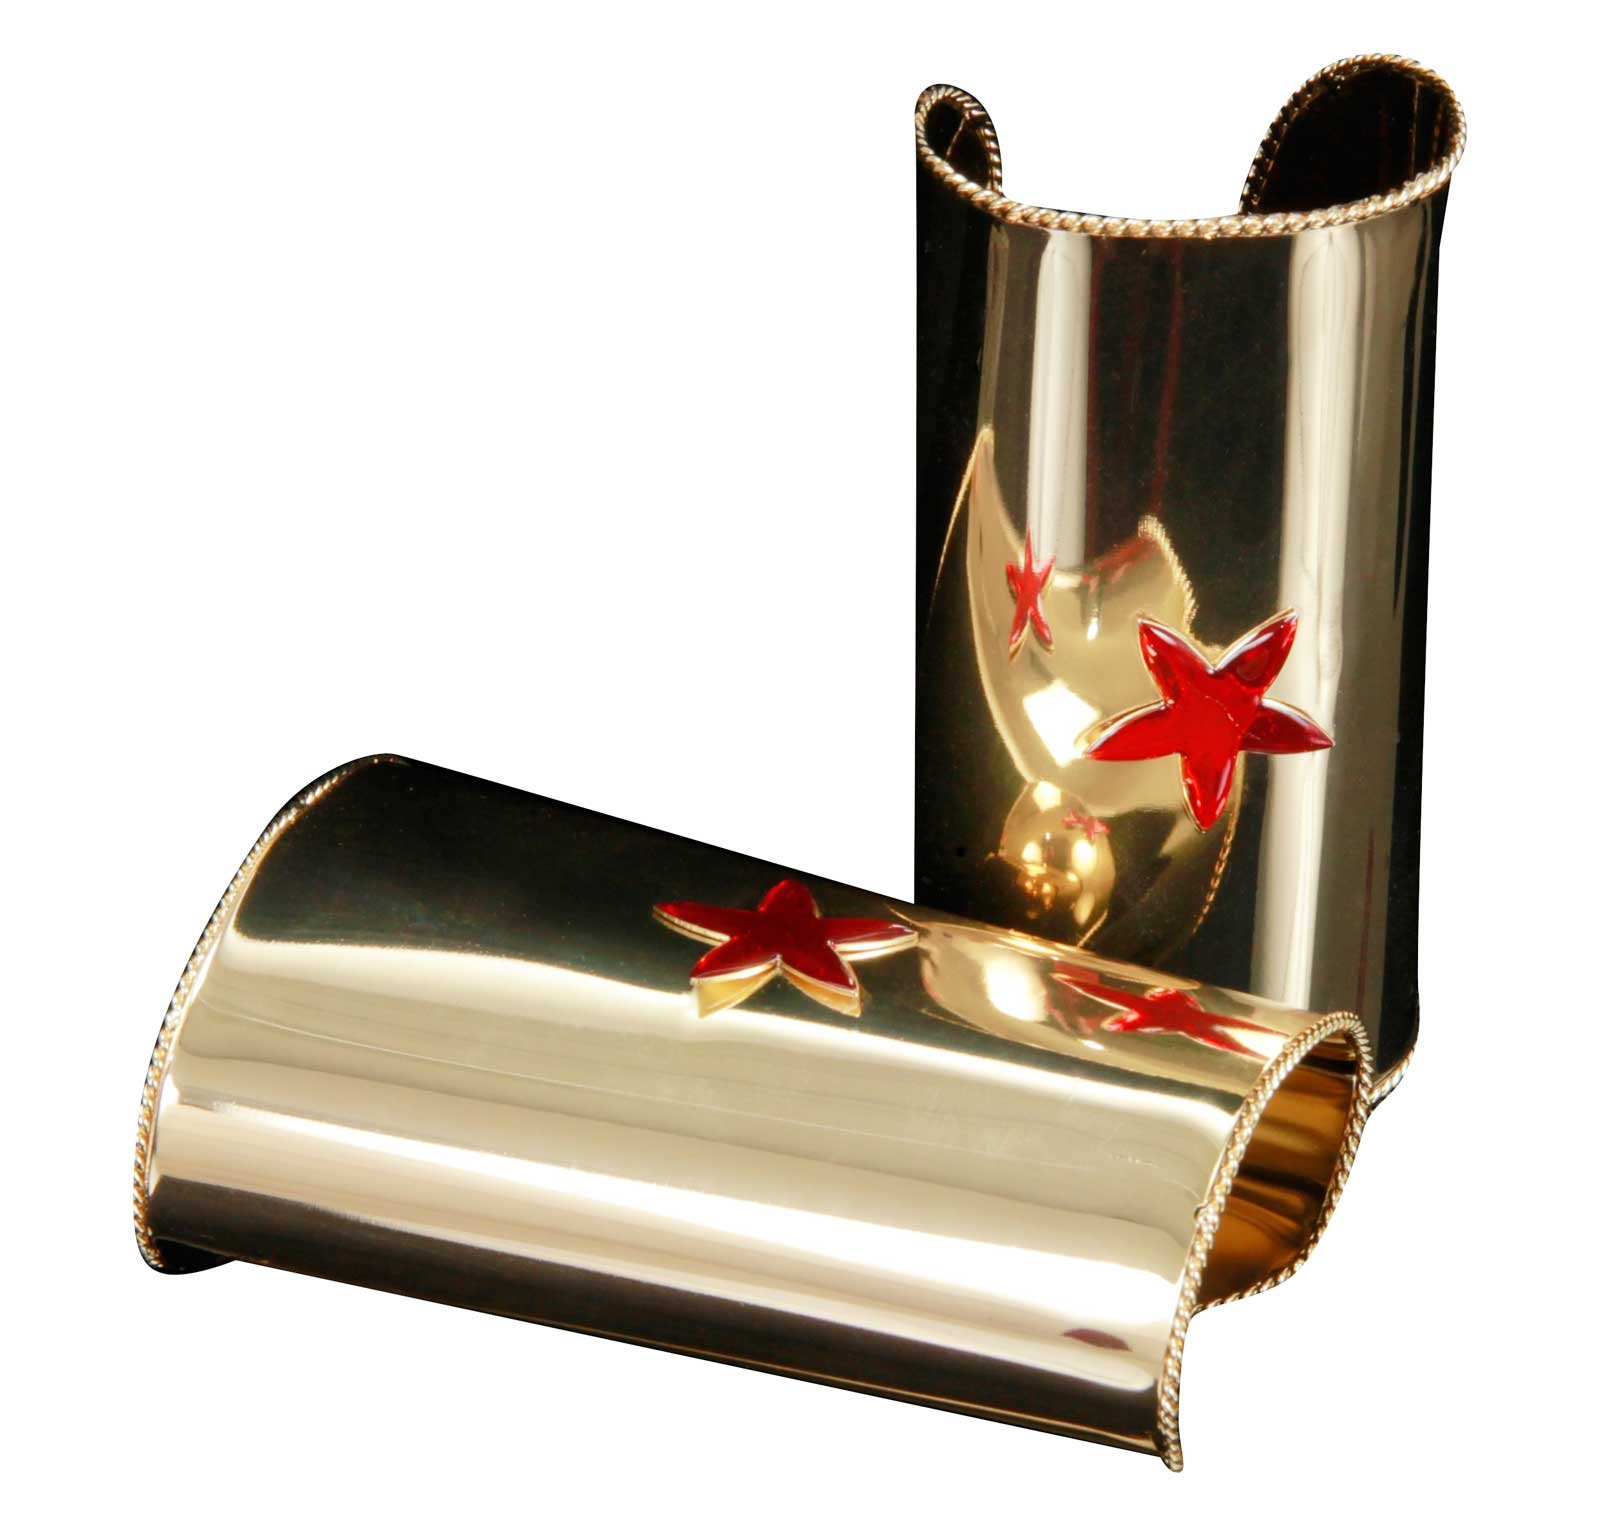 Gold Cuff With Red Star Adult